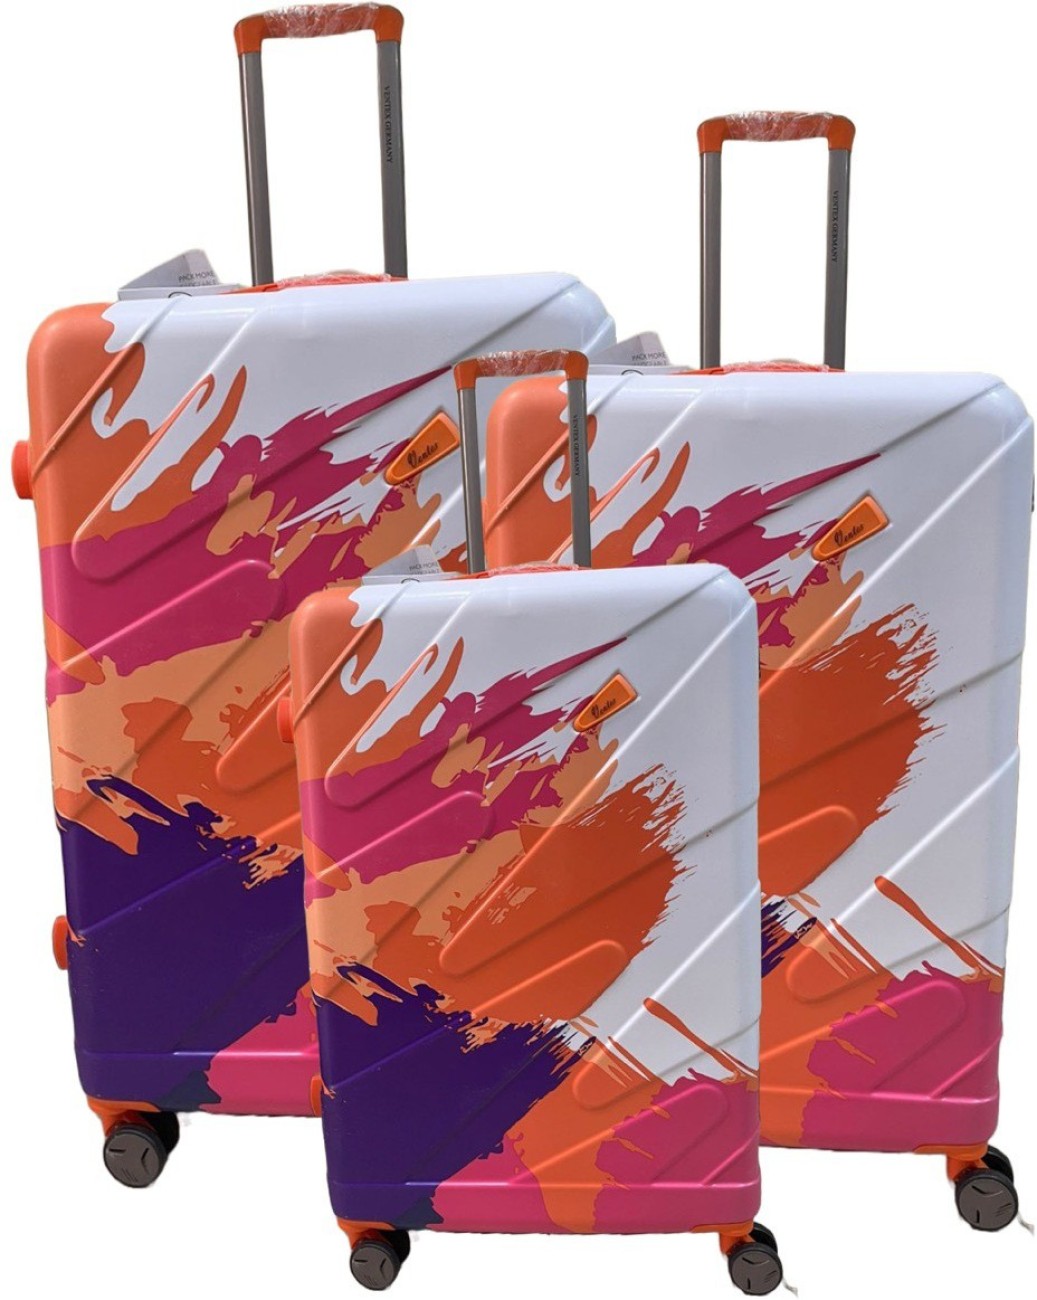 Swiss Era Variation 28 Inch Multi color 4 wheel trolley bags Checkin  Suitcase  28 inch Multi Color  Price in India  Flipkartcom